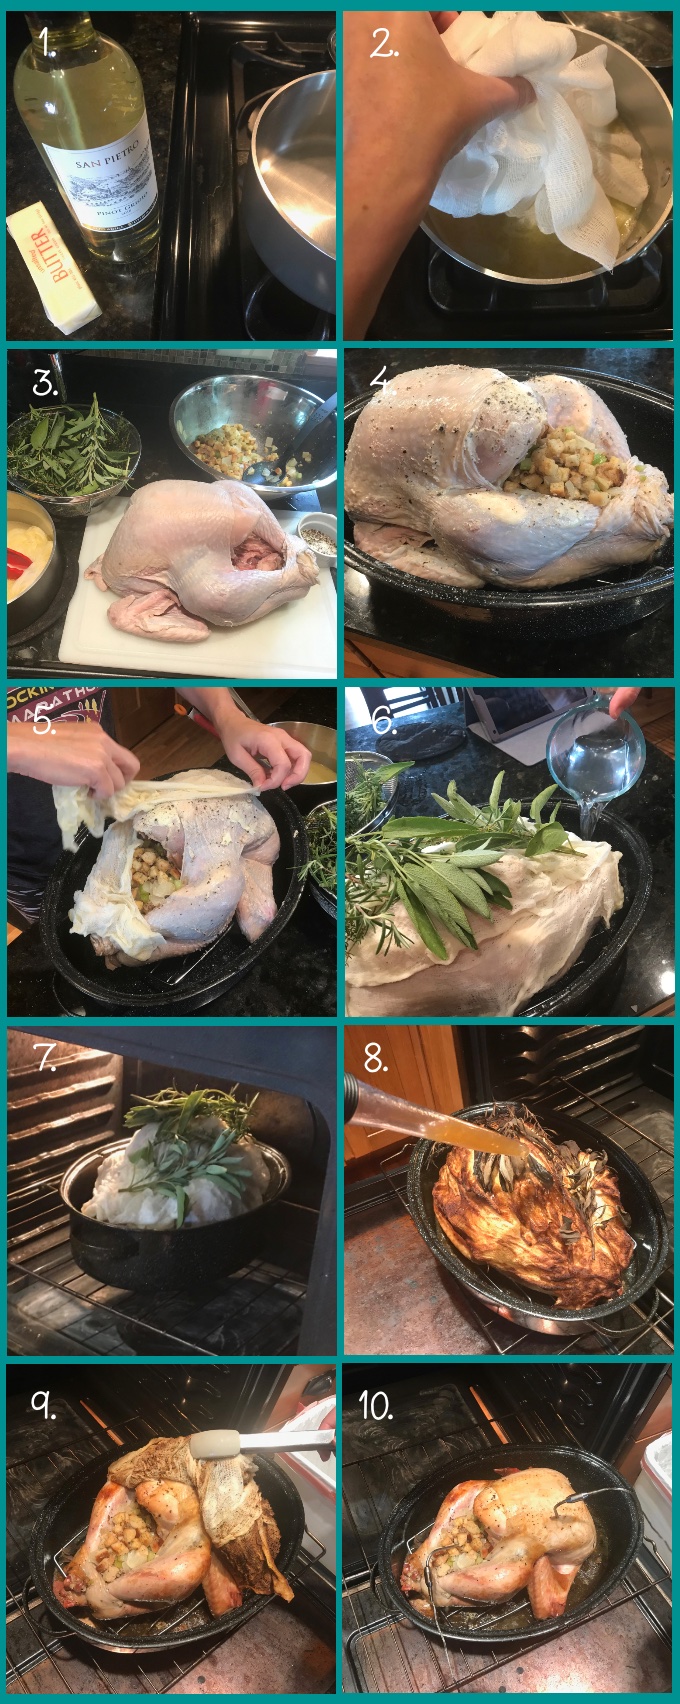 How to make Ultimate Classic Roast Turkey: 1. Make wine and butter mixture. 2. Add a cheesecloth to the mixture and let cool. 3. Prep the turkey by rubbing with butter, salt, and pepper. 4. Stuff the turkey. 5. Wring out the cheesecloth and drape over the turkey. 6. Pile fresh herbs on top of the cheesecloth and pour water in the roasting pan so you have ½ inch on the bottom. 7. Put the turkey in a 450º F oven; roast 30 minutes. 8. Baste with wine mixture and reduce heat to 350º F. Continue roasting for 2.5 hours, basting every half hour with the wine mixture or pan juices. 9. Remove the cheesecloth and herbs; discard. 10. Insert probes of a digital thermometer into the center of the stuffing and either a thigh or a breast. Continue roasting until the breast and stuffing reach 165º F and the thigh registers 180º F.